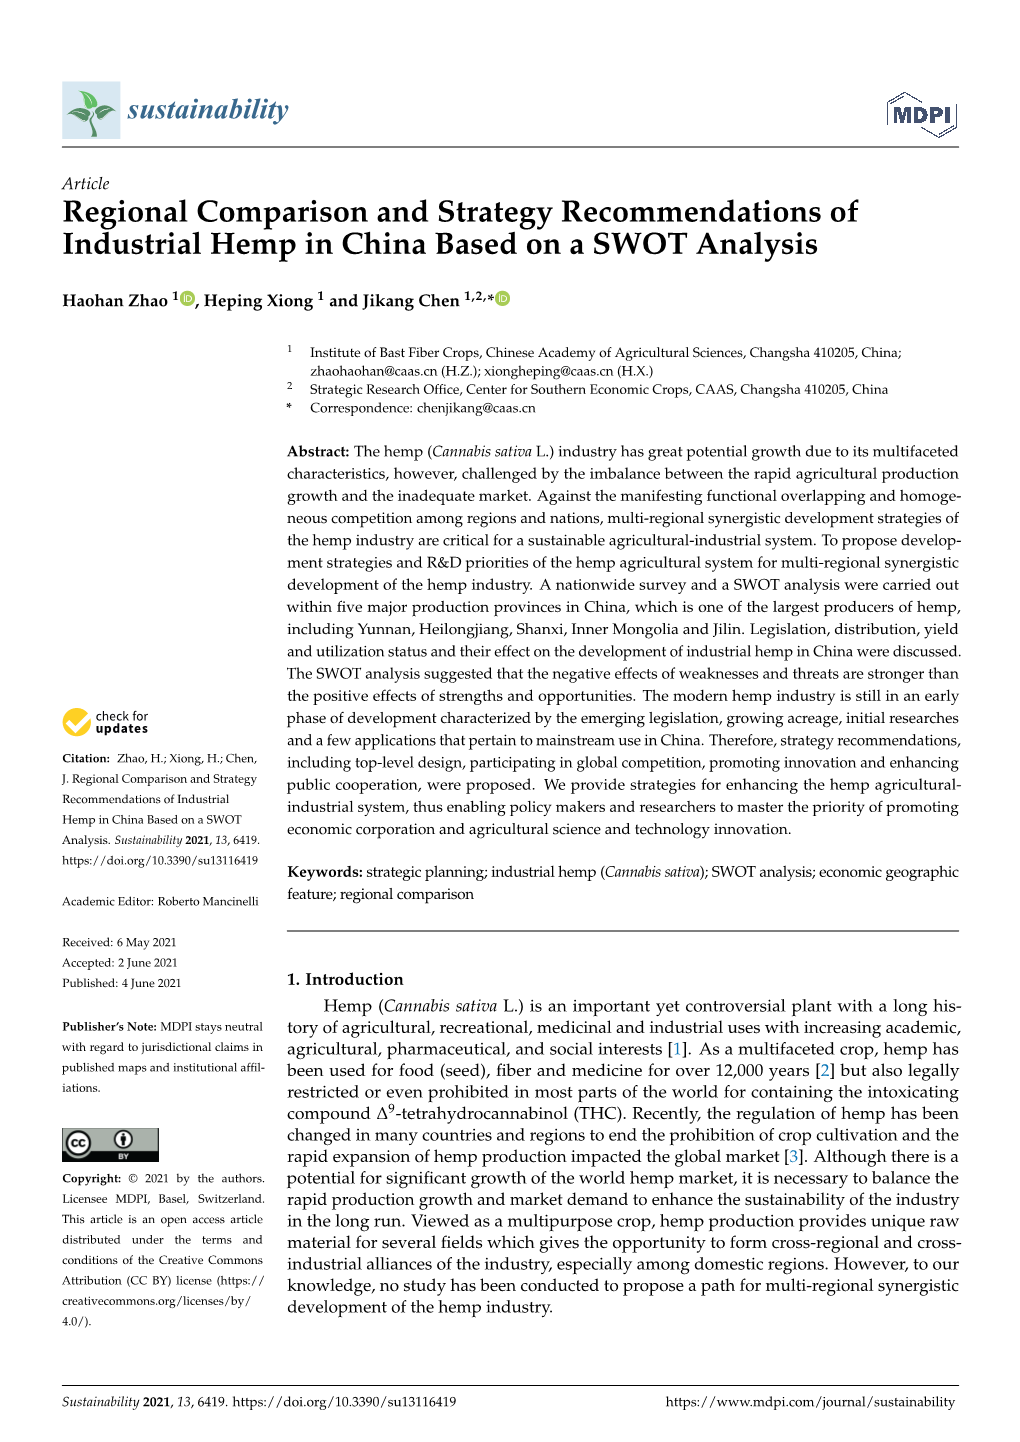 Regional Comparison and Strategy Recommendations of Industrial Hemp in China Based on a SWOT Analysis